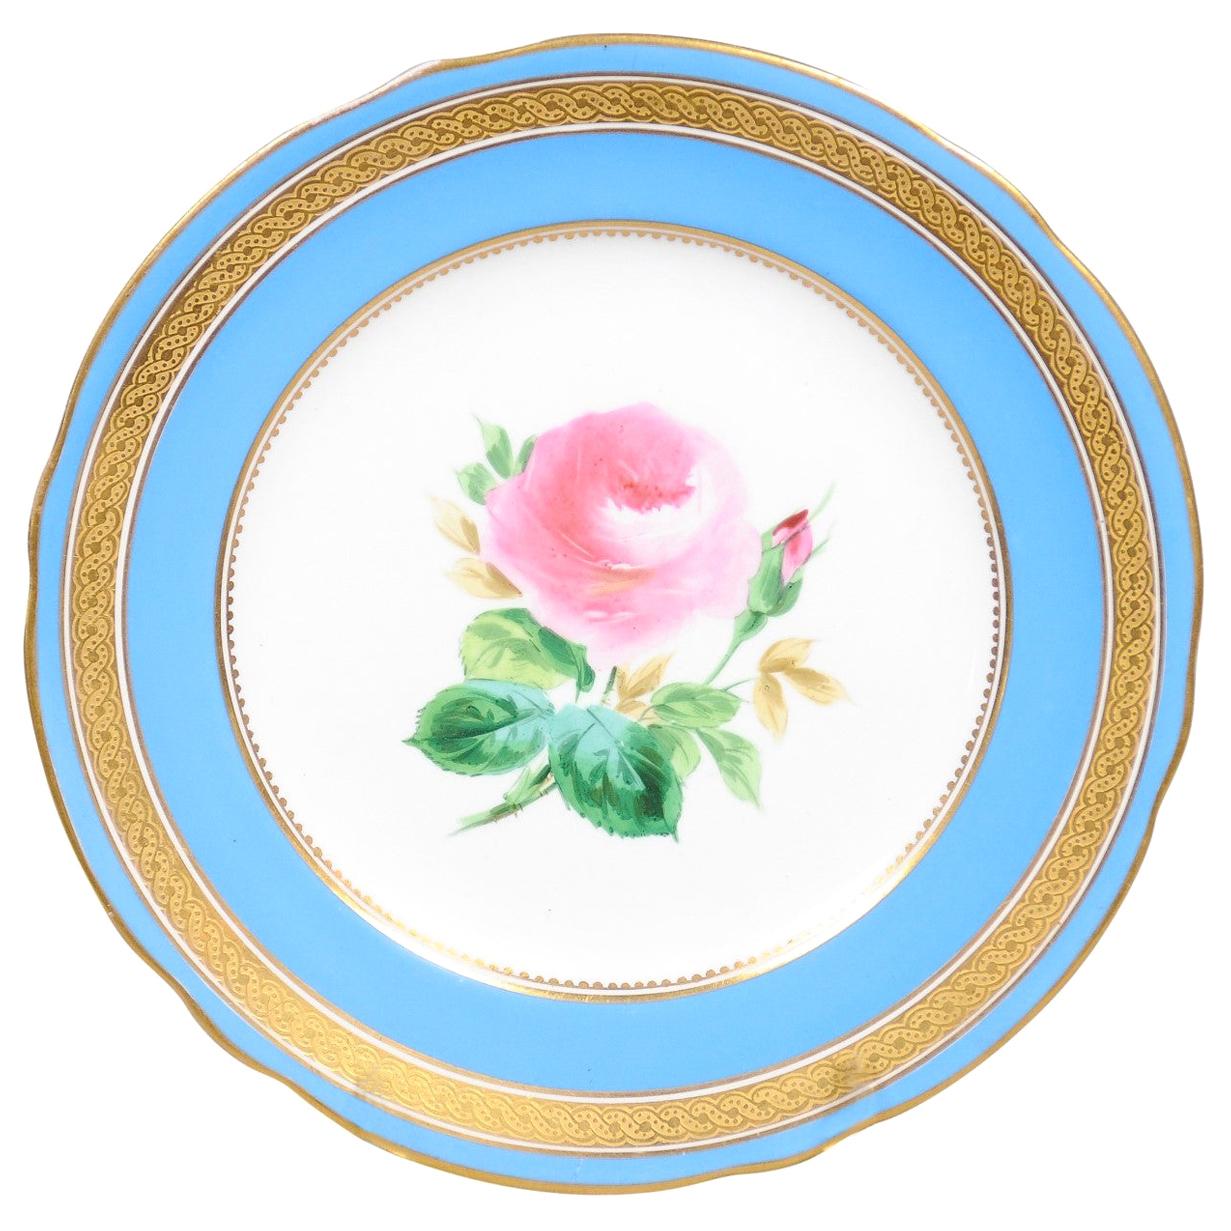 English Turquoise and Gilt 19th Century Pink Rose Painted Faience Dessert Plate